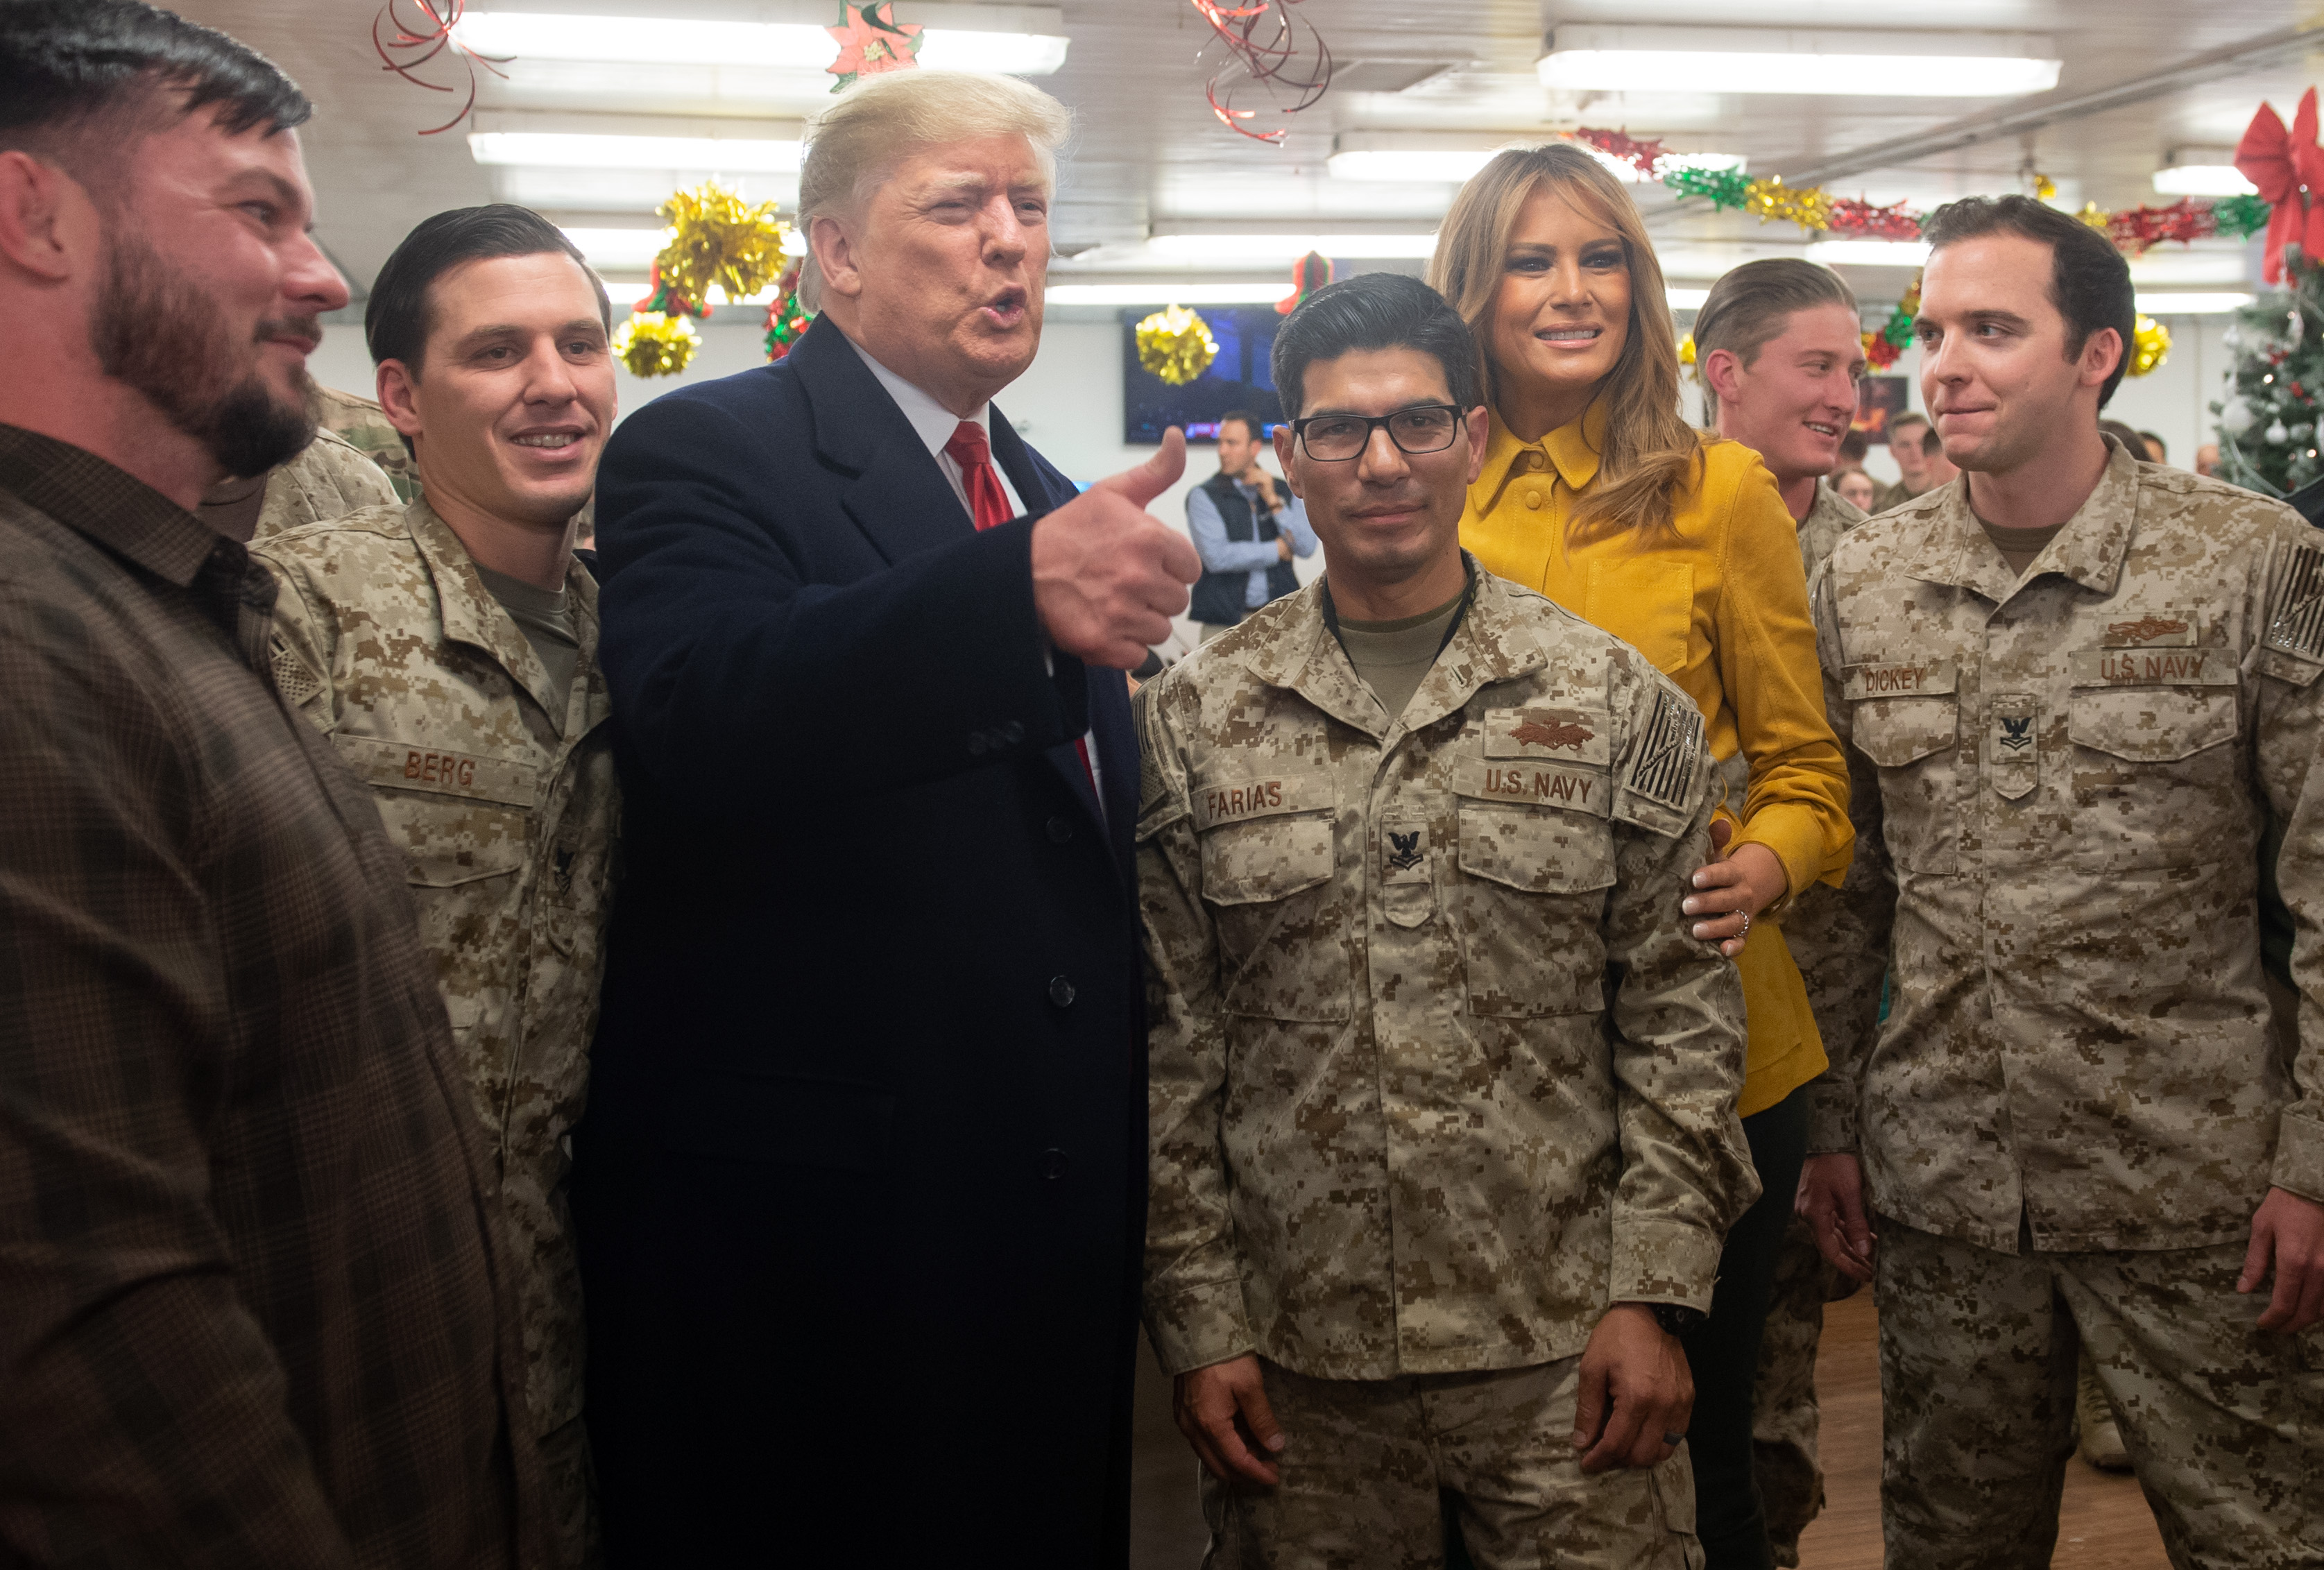 President Donald Trump and First Lady Melania Trump greet members of the US military during an unannounced trip to Al Asad Air Base in Iraq on December 26, 2018. (SAUL LOEB—AFP/Getty Images)